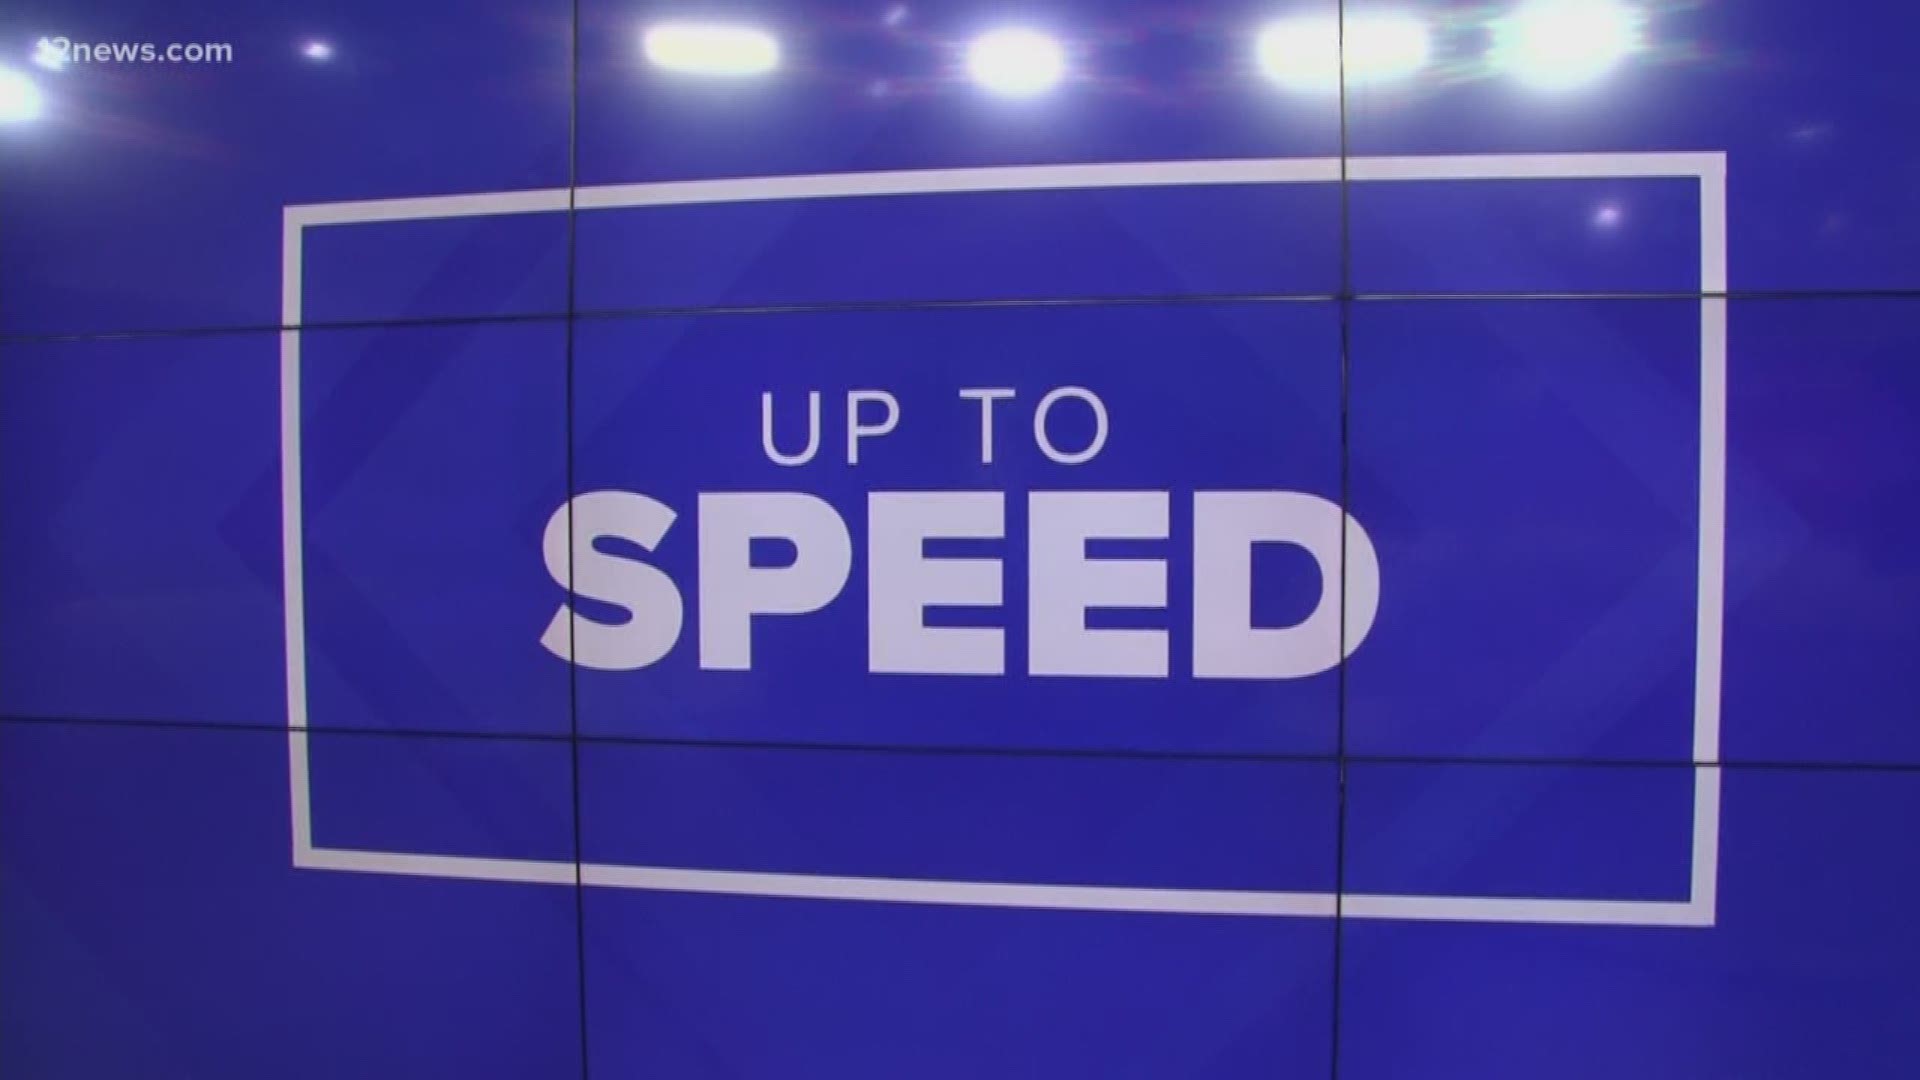 We get you "Up to Speed" on the latest news happening around the Valley and across the world on Wednesday afternoon.